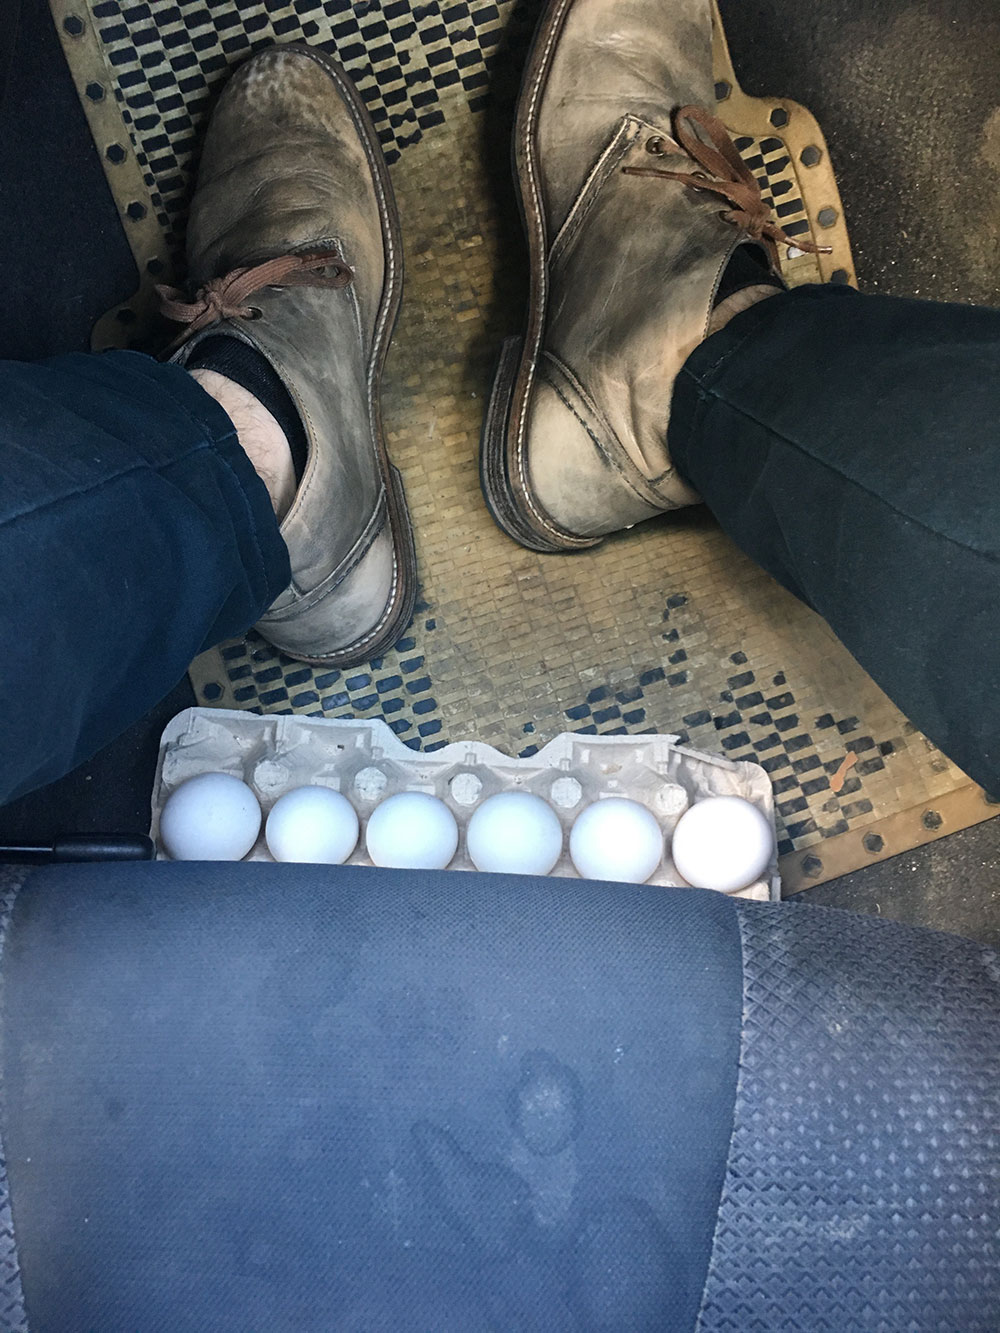 Eggs in taxi